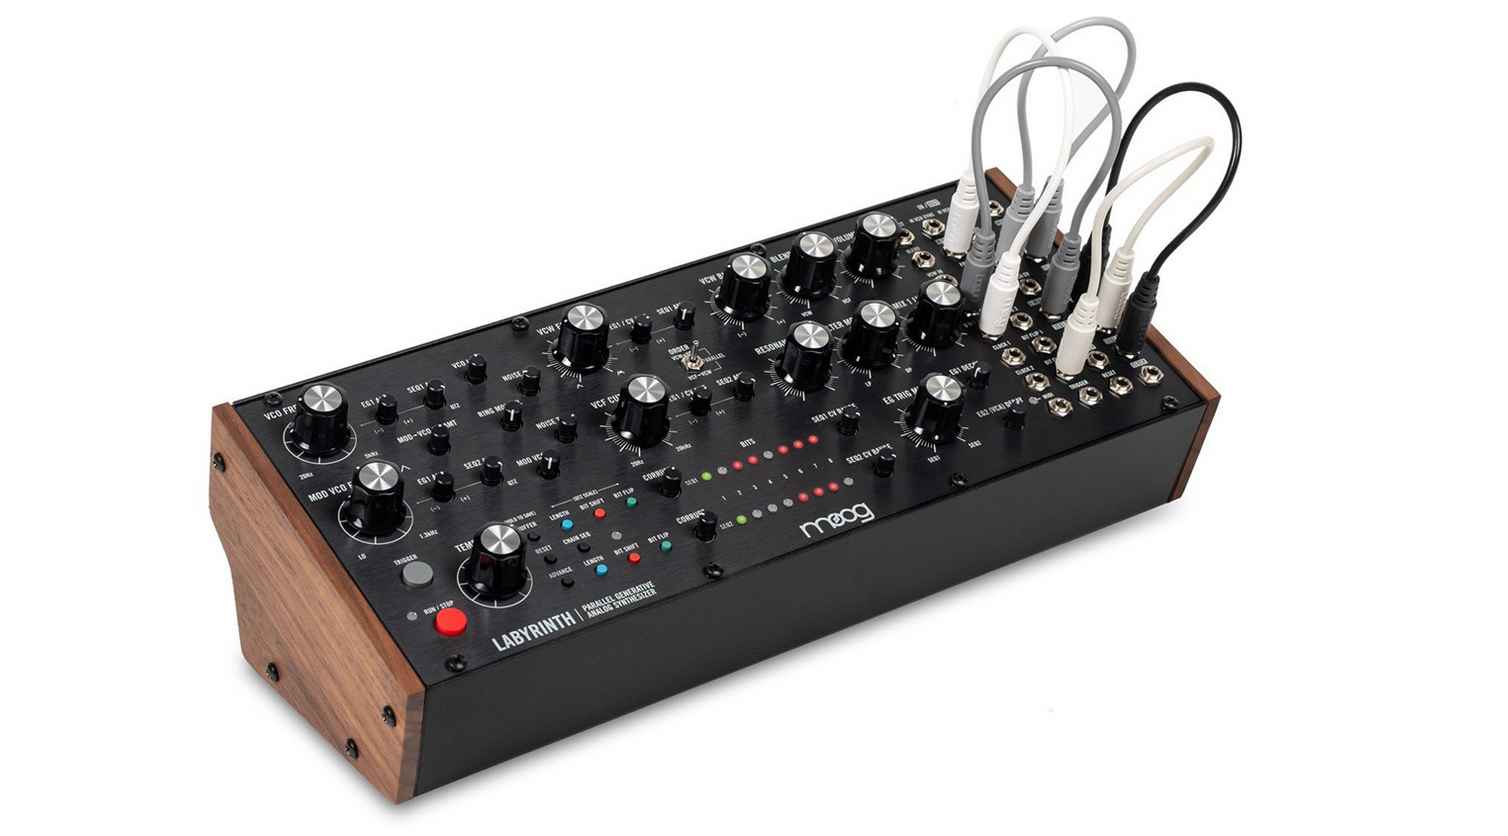 Upcoming Moog Labyrinth synthesizer appears to leak via online retailer